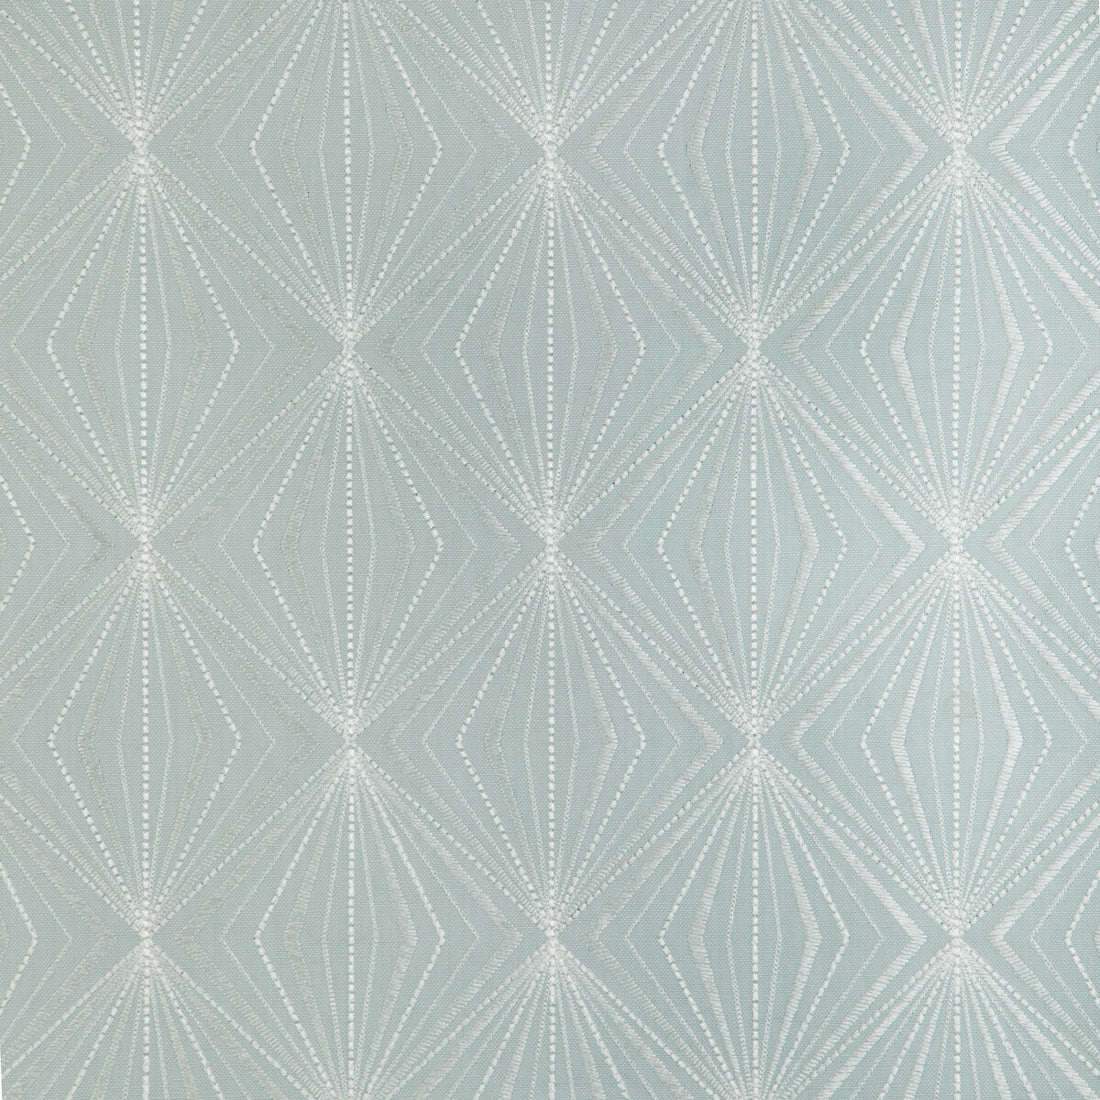 Rare Diamond fabric in mineral color - pattern 36873.113.0 - by Kravet Design in the Candice Olson collection